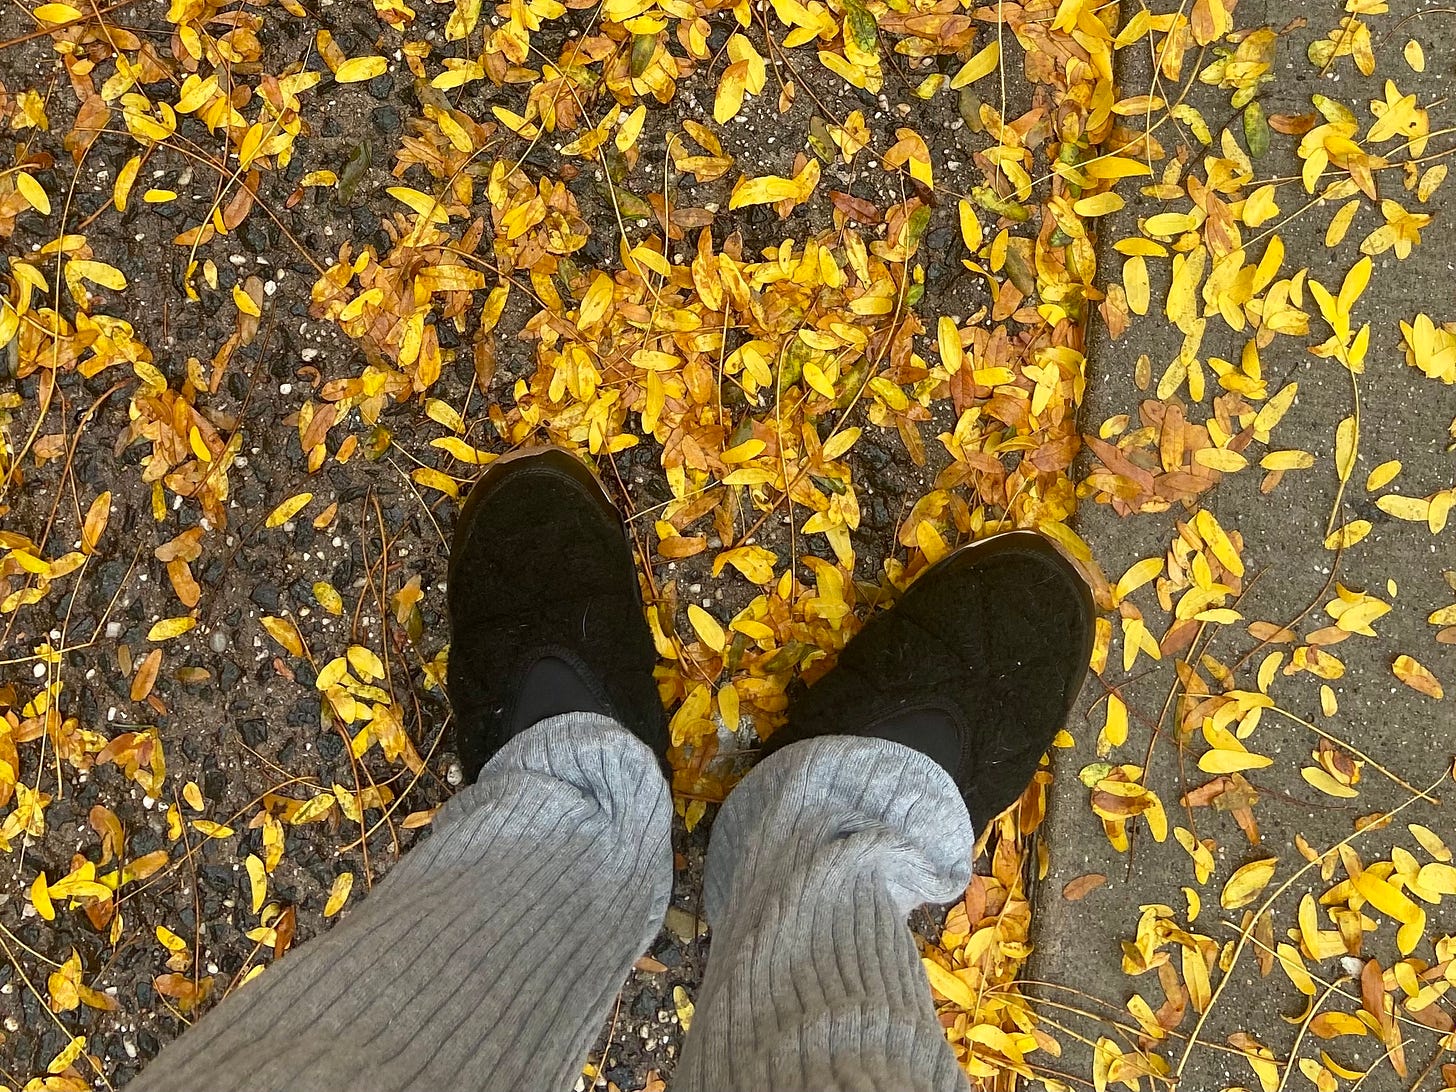 Black, fleece slipper-like shoes standing on pavement covered by fallen leaves. 